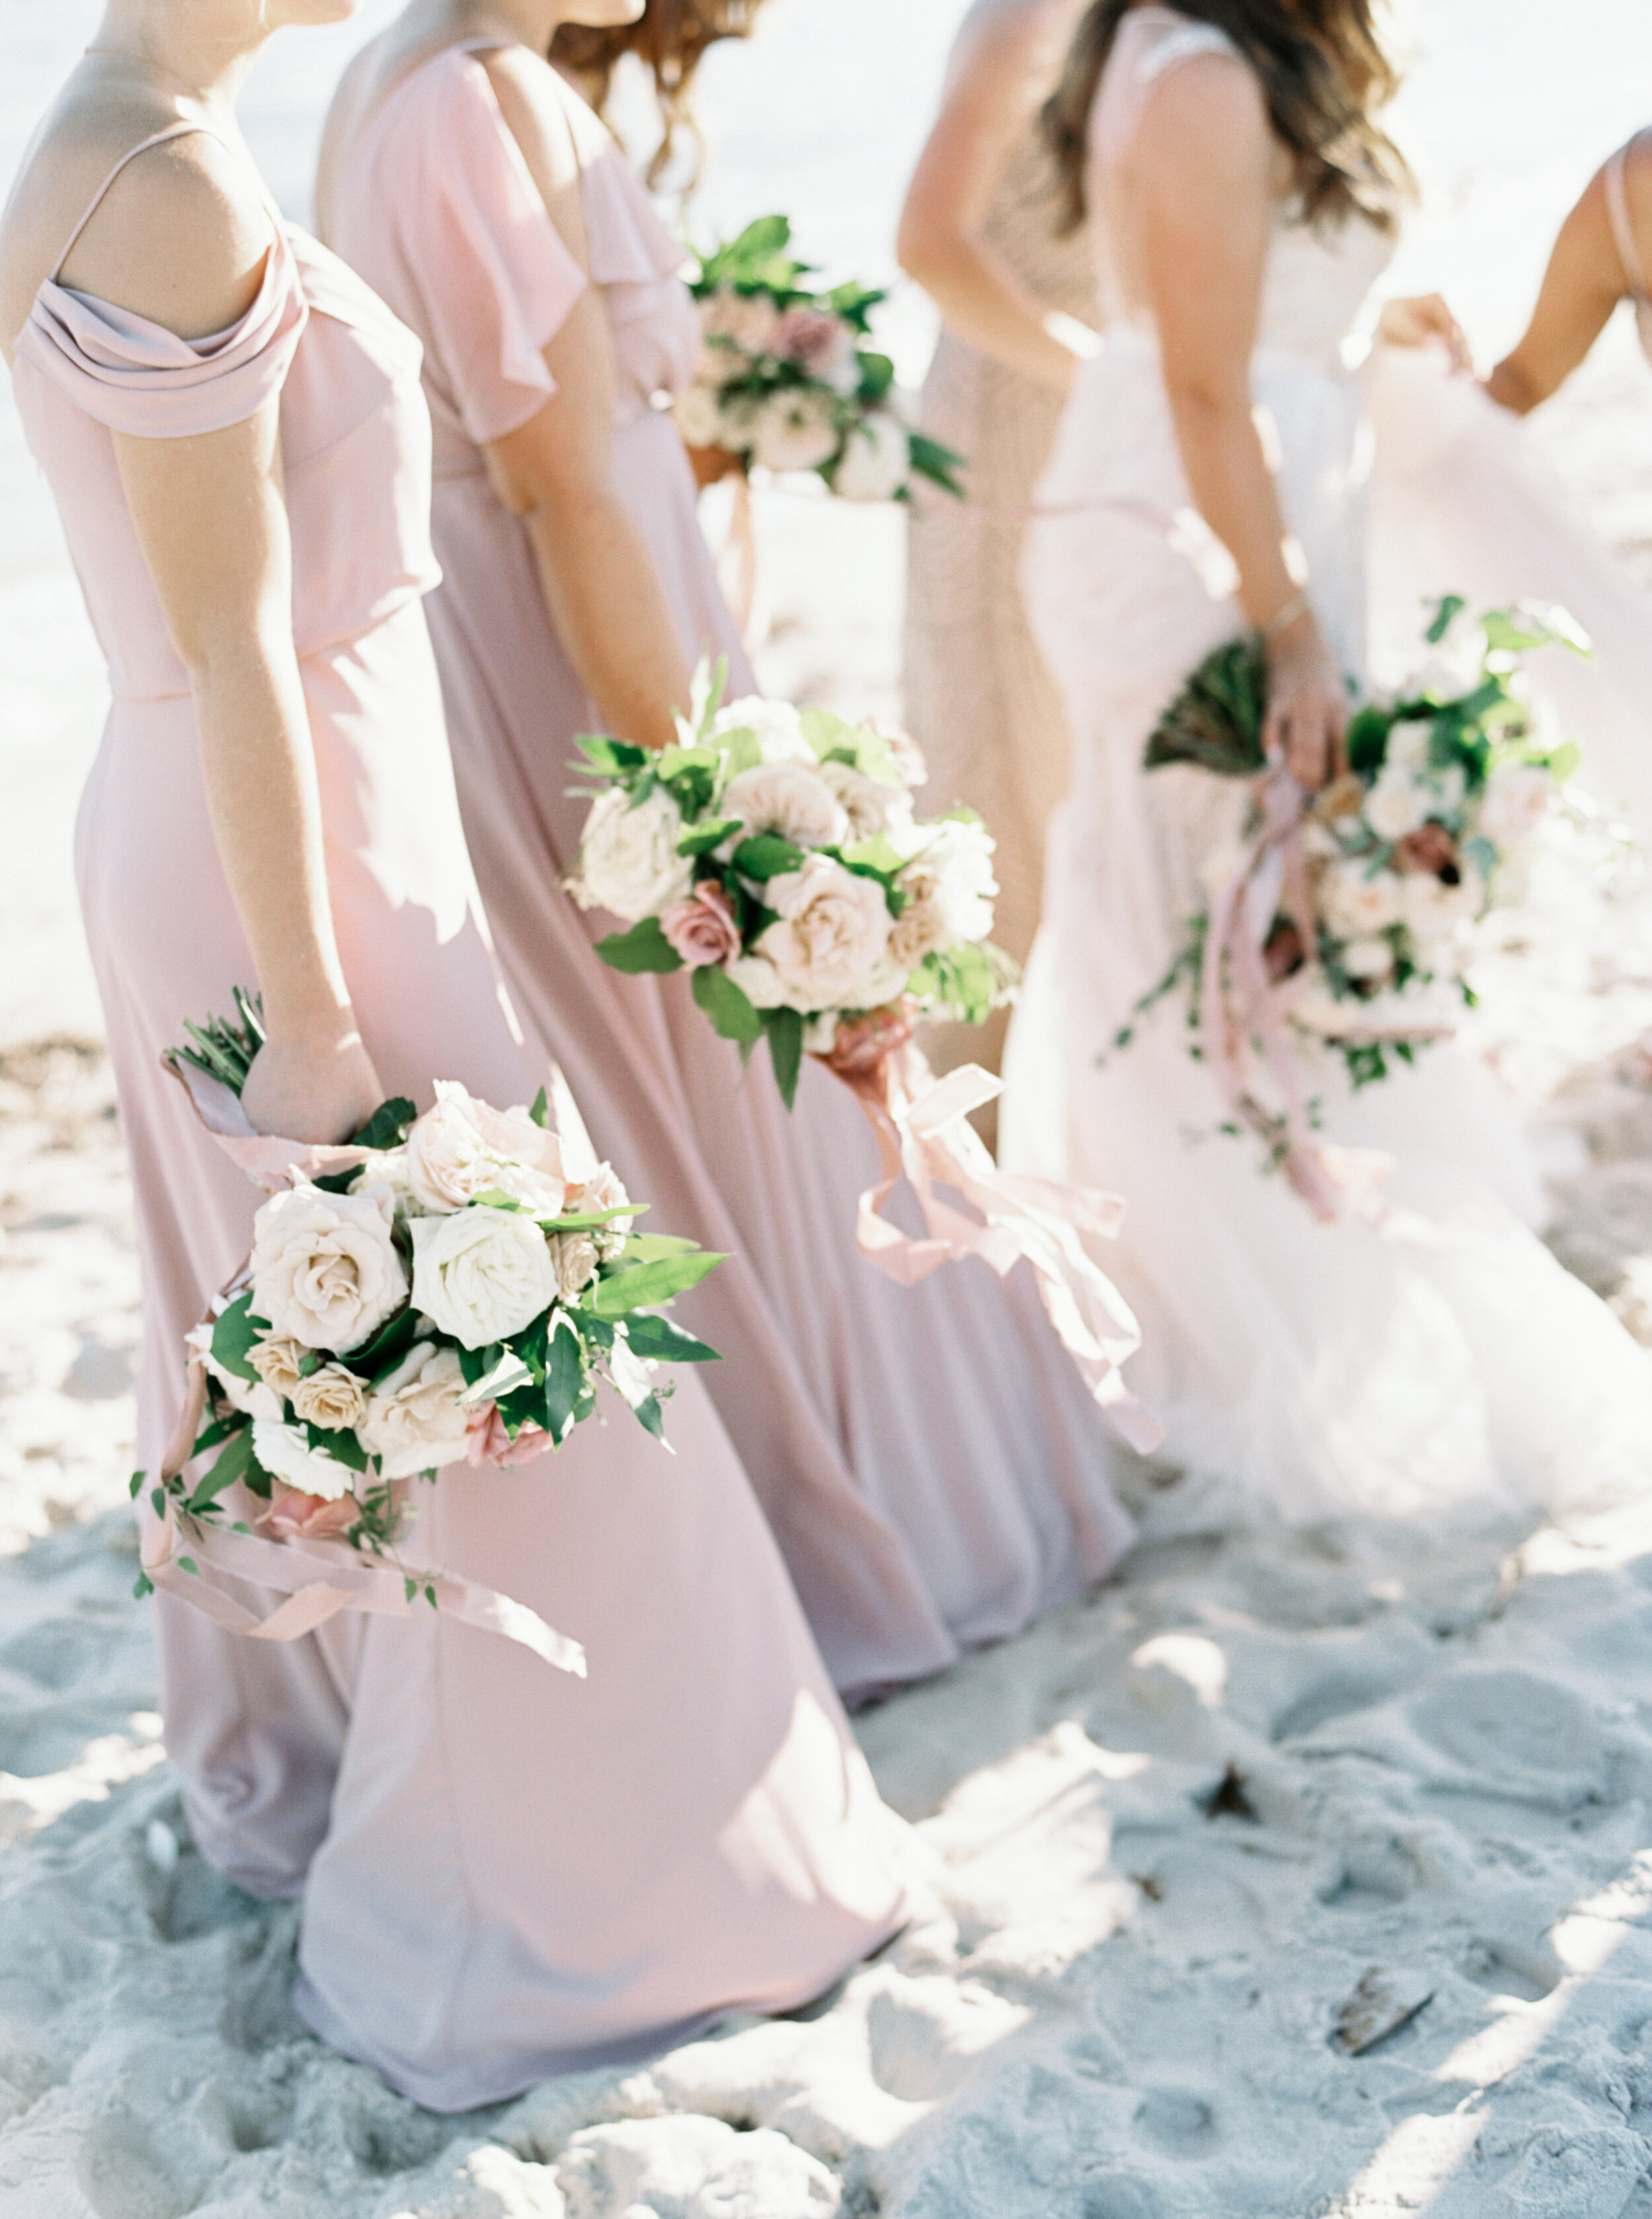  First as gorgeous bridesmaid bouquets Florals by The Wild Dahlia | Photography by Elizabeth Laduca 